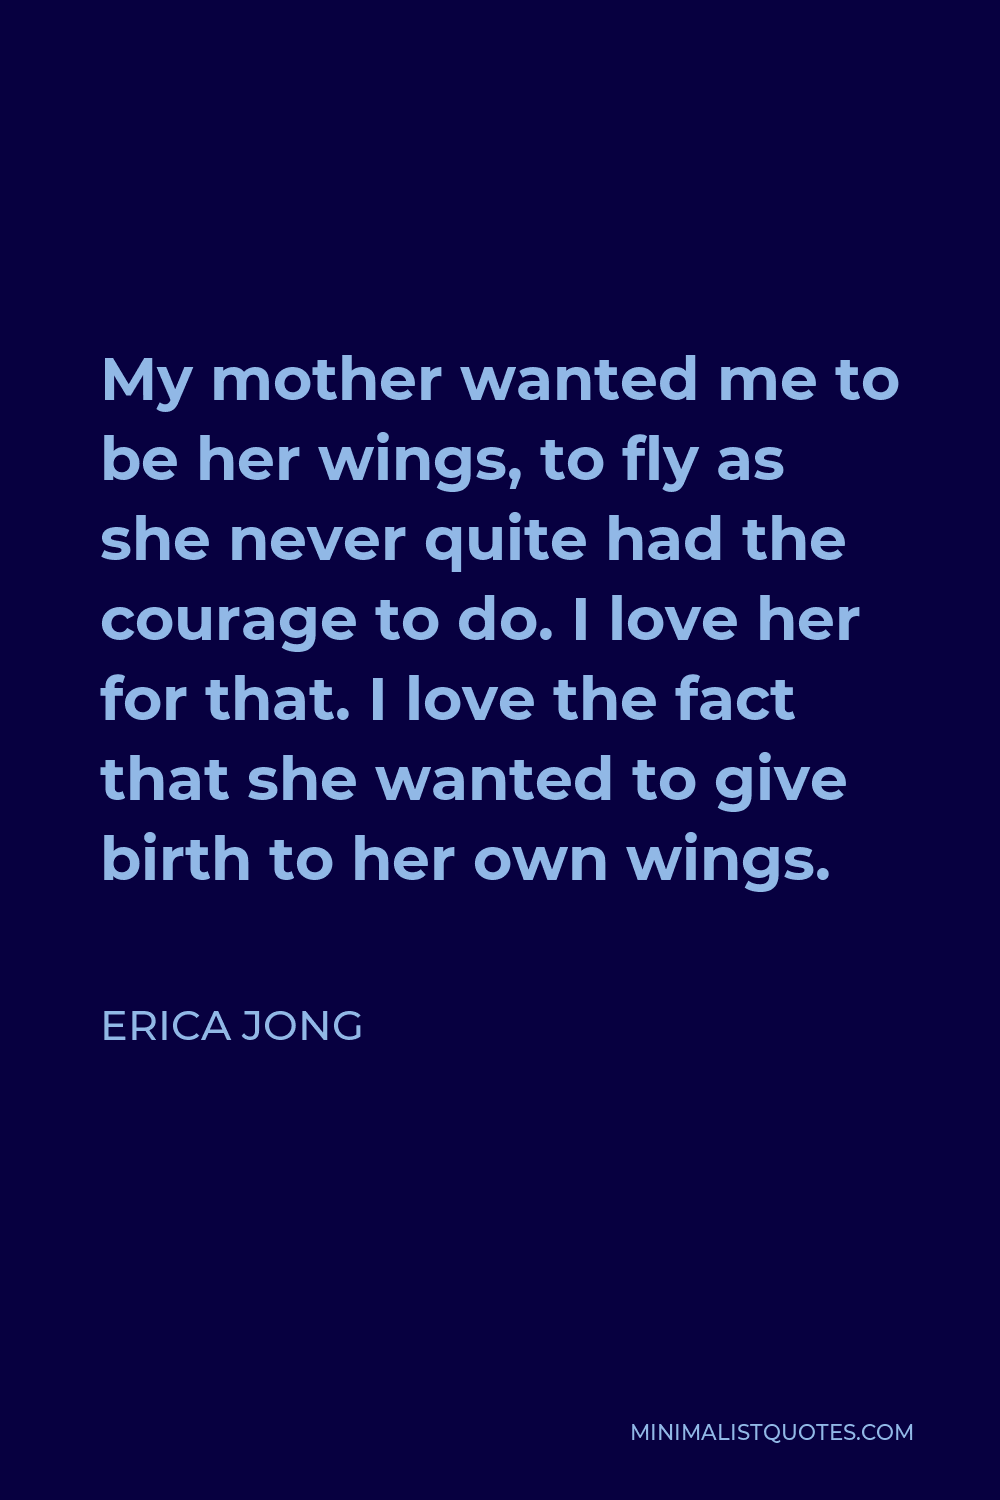 Erica Jong Quote - My mother wanted me to be her wings, to fly as she never quite had the courage to do. I love her for that. I love the fact that she wanted to give birth to her own wings.